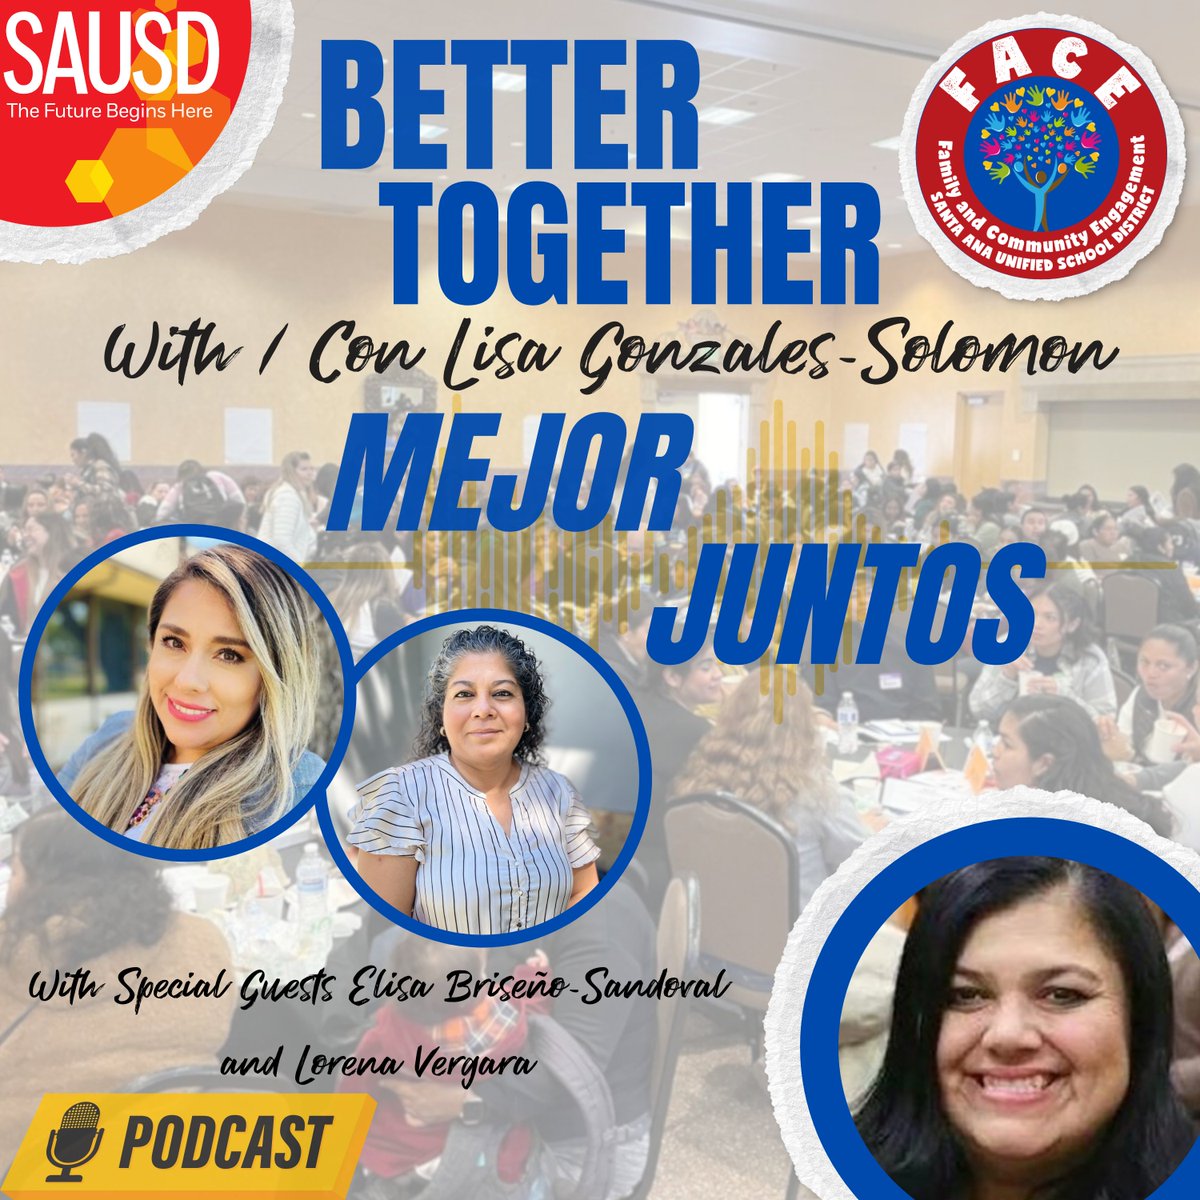 NEW EPISODE ALERT!!! ⏰ SAUSD’s Better Together / Mejor Juntos, ‘1. Better Together: Uniting Families and Schools for a Thriving Community’, is now streaming! Find us at bit.ly/SAUSDBetterTog… or wherever you listen to podcasts. 🎙️ #wearesausd #bettertogether #education #podcast